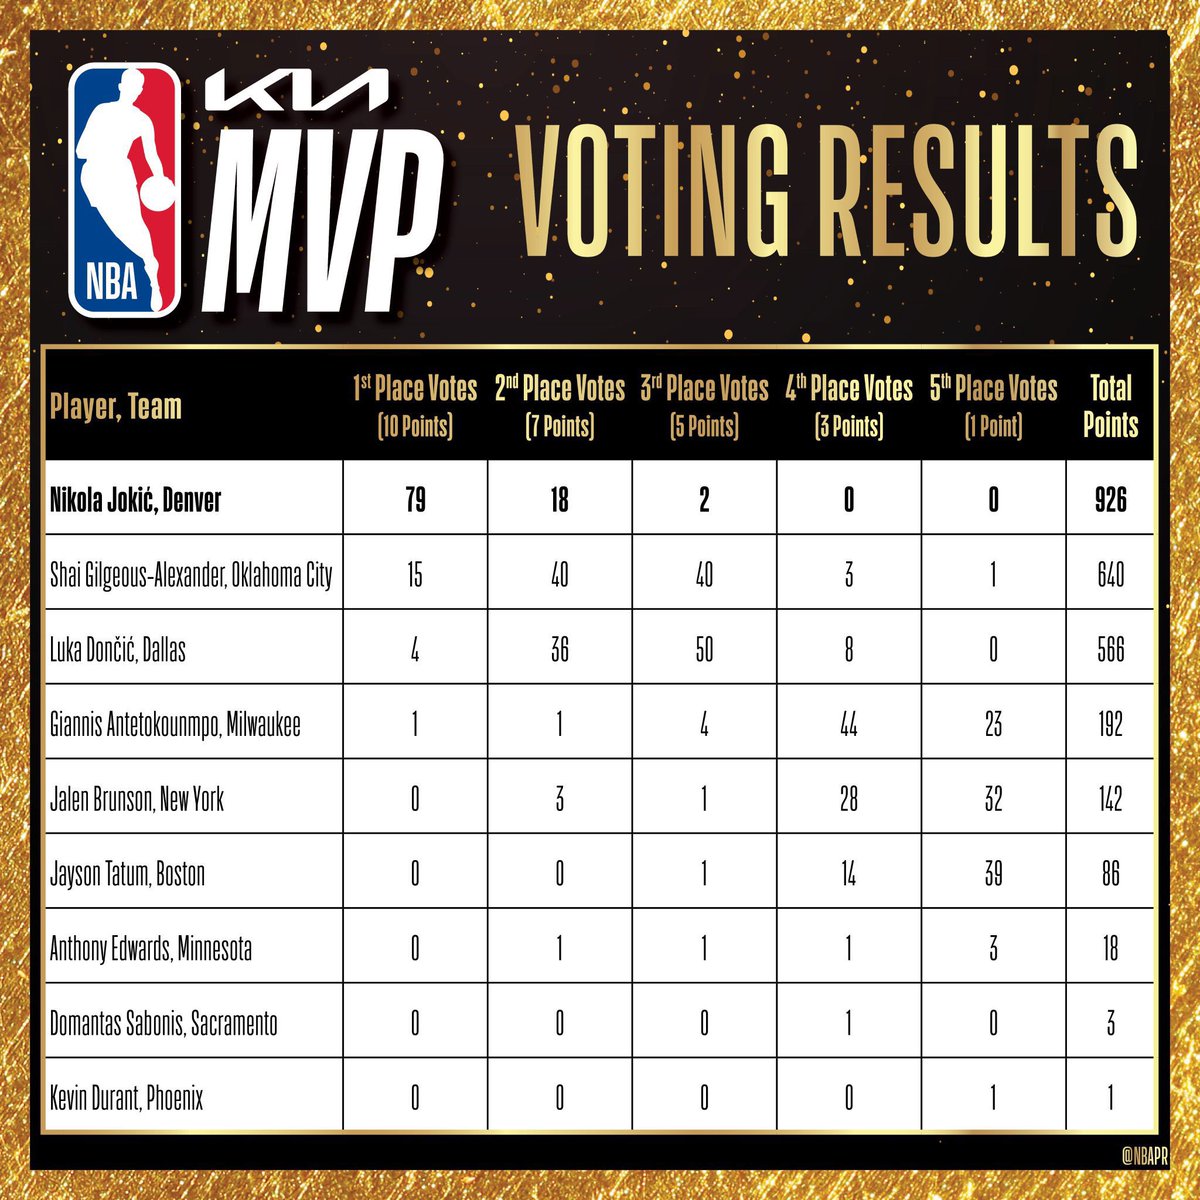 Nikola Jokic wins his 3rd MVP in the last three seasons and joins a list of nine total players with 3 or more NBA MVPs in NBA history. 

It was a landslide as I said it would be.